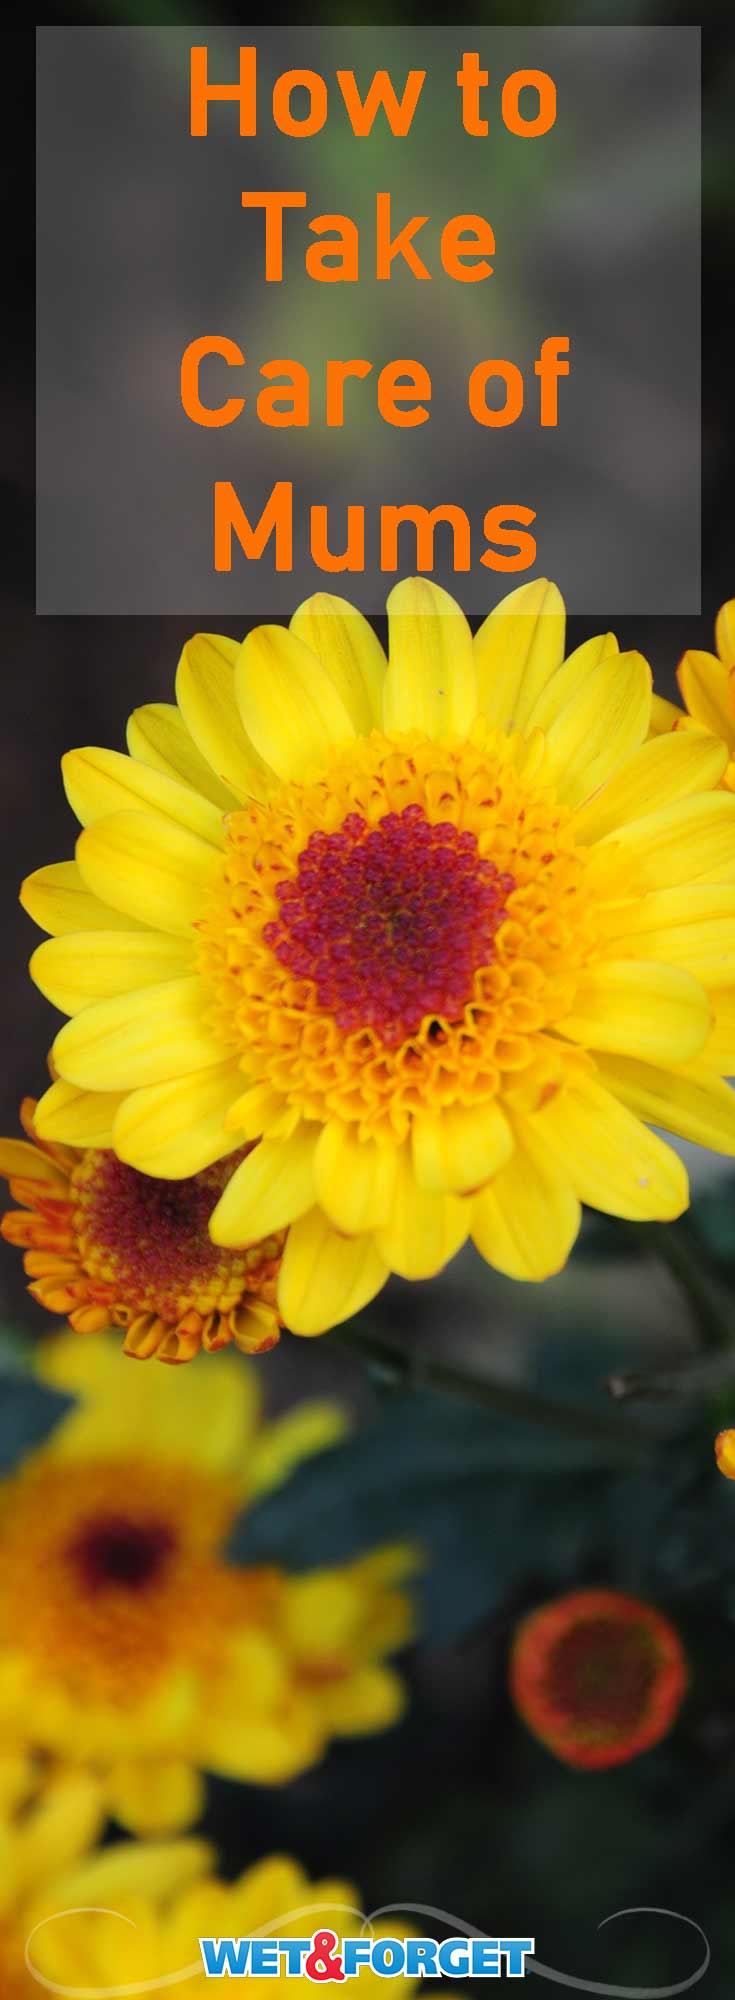 Mums come in many shapes, colors, and sizes! Learn how to plant mums, care for potted mums, and more with this easy guide!